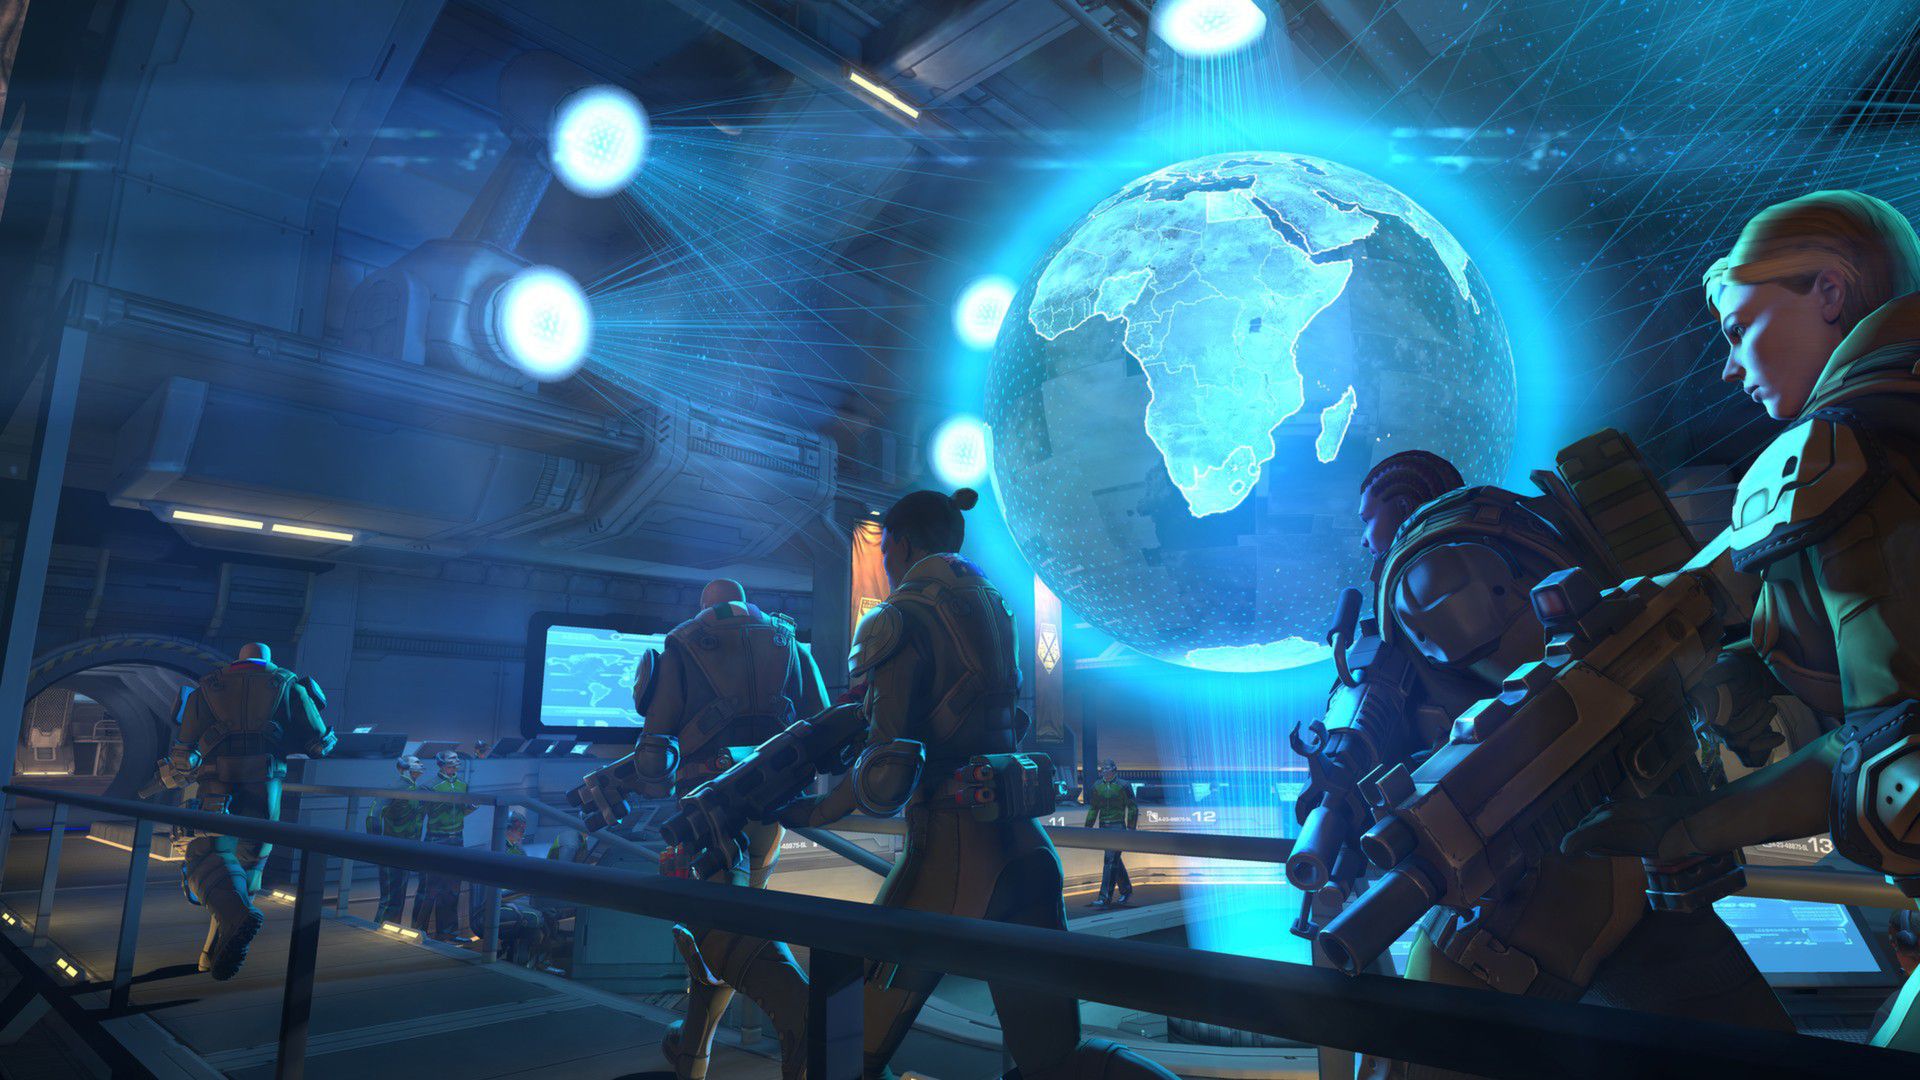 XCOM: Enemy Unknown will place you in control of a secret paramilitary orga...